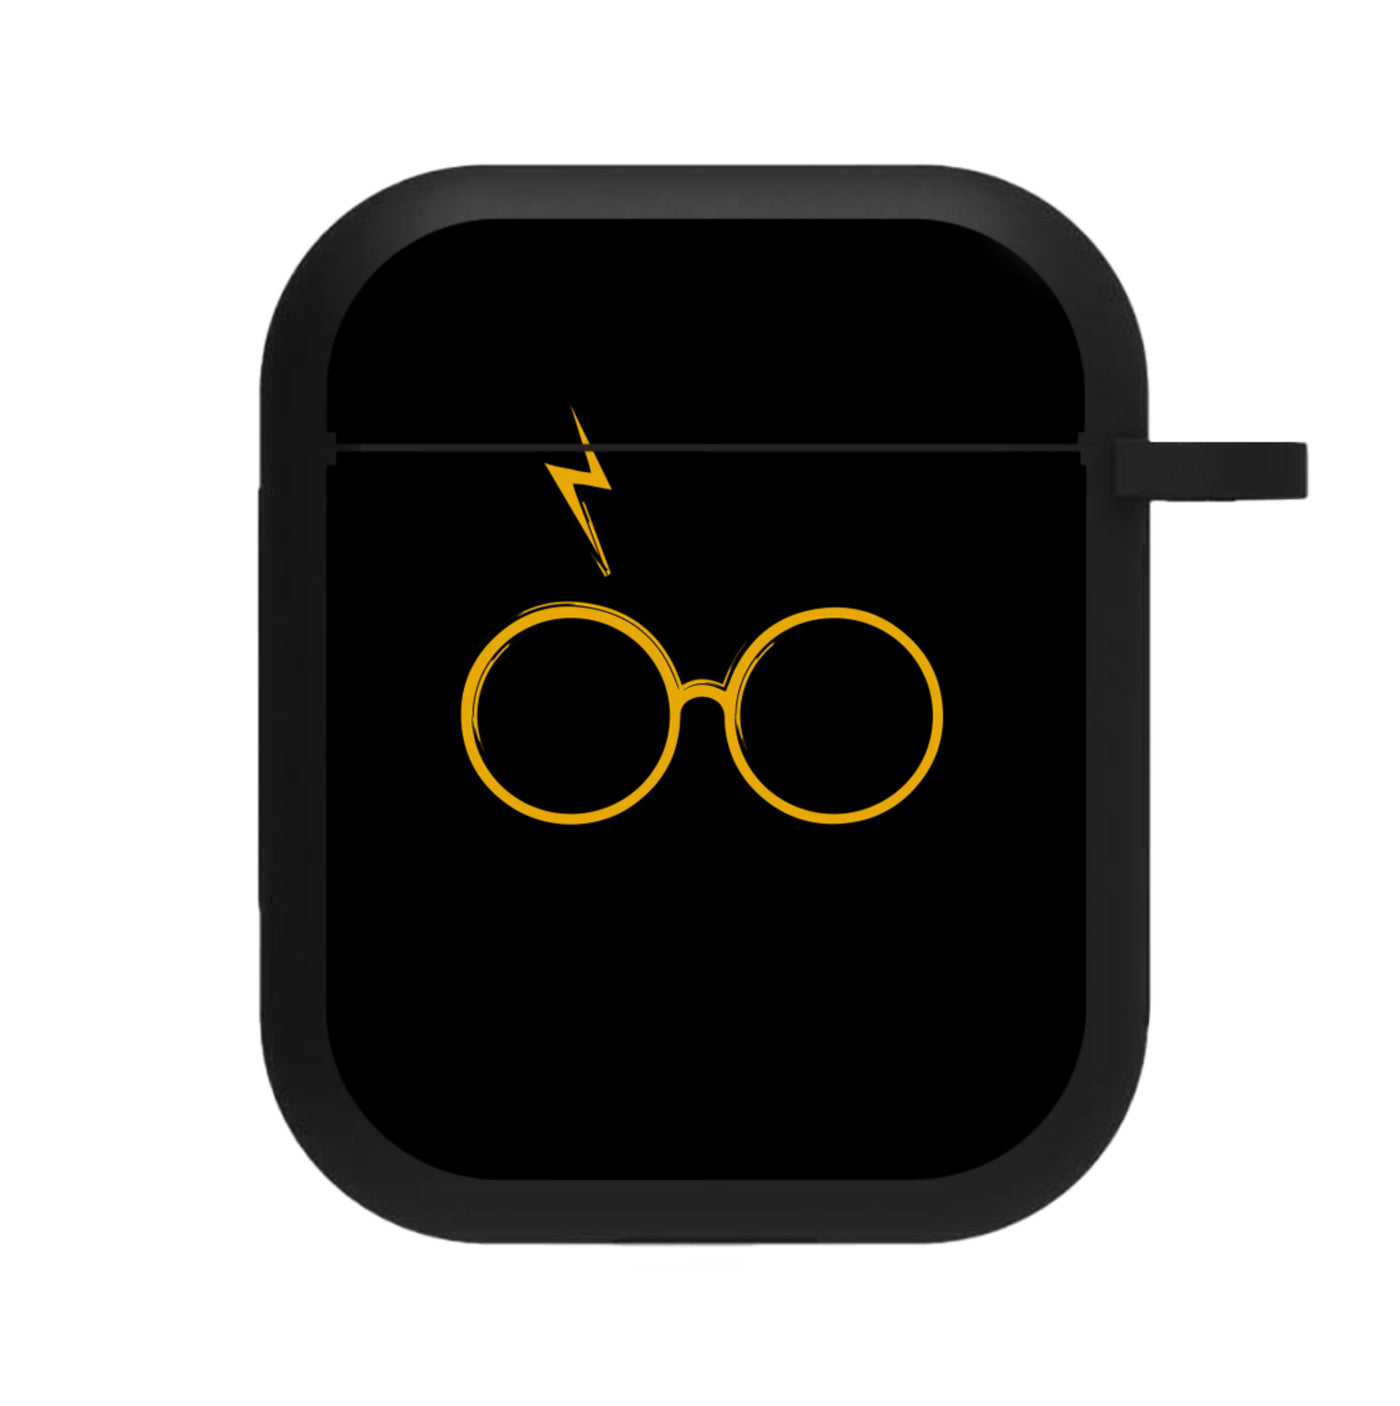 Glasses & Scar - Harry Potter AirPods Case